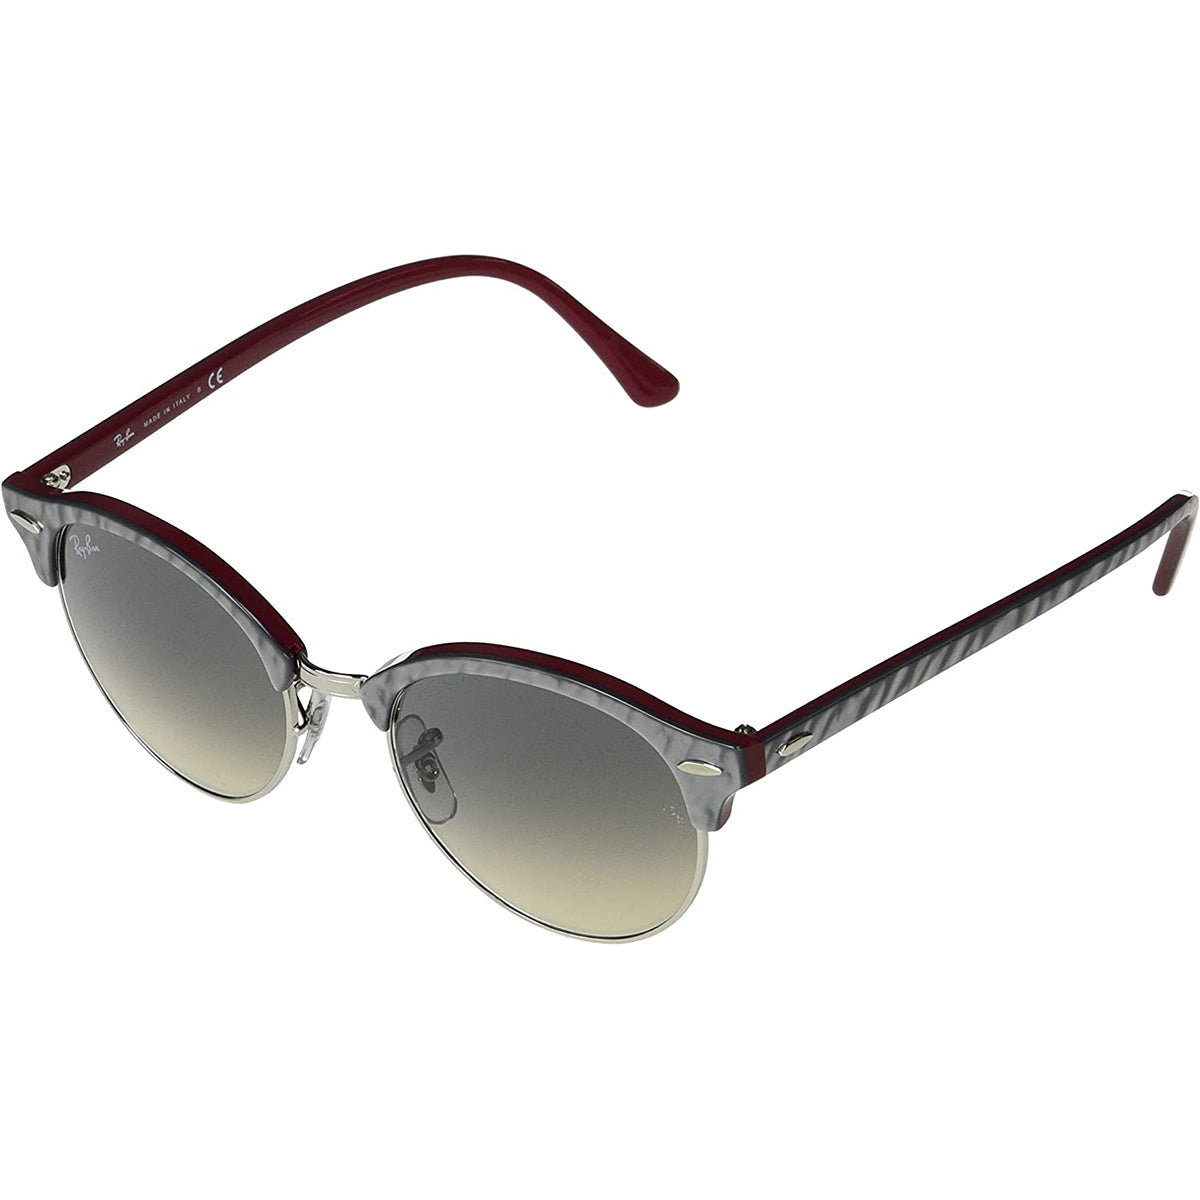 Ray-Ban Clubround Classic Adult Lifestyle Sunglasses-0RB4246